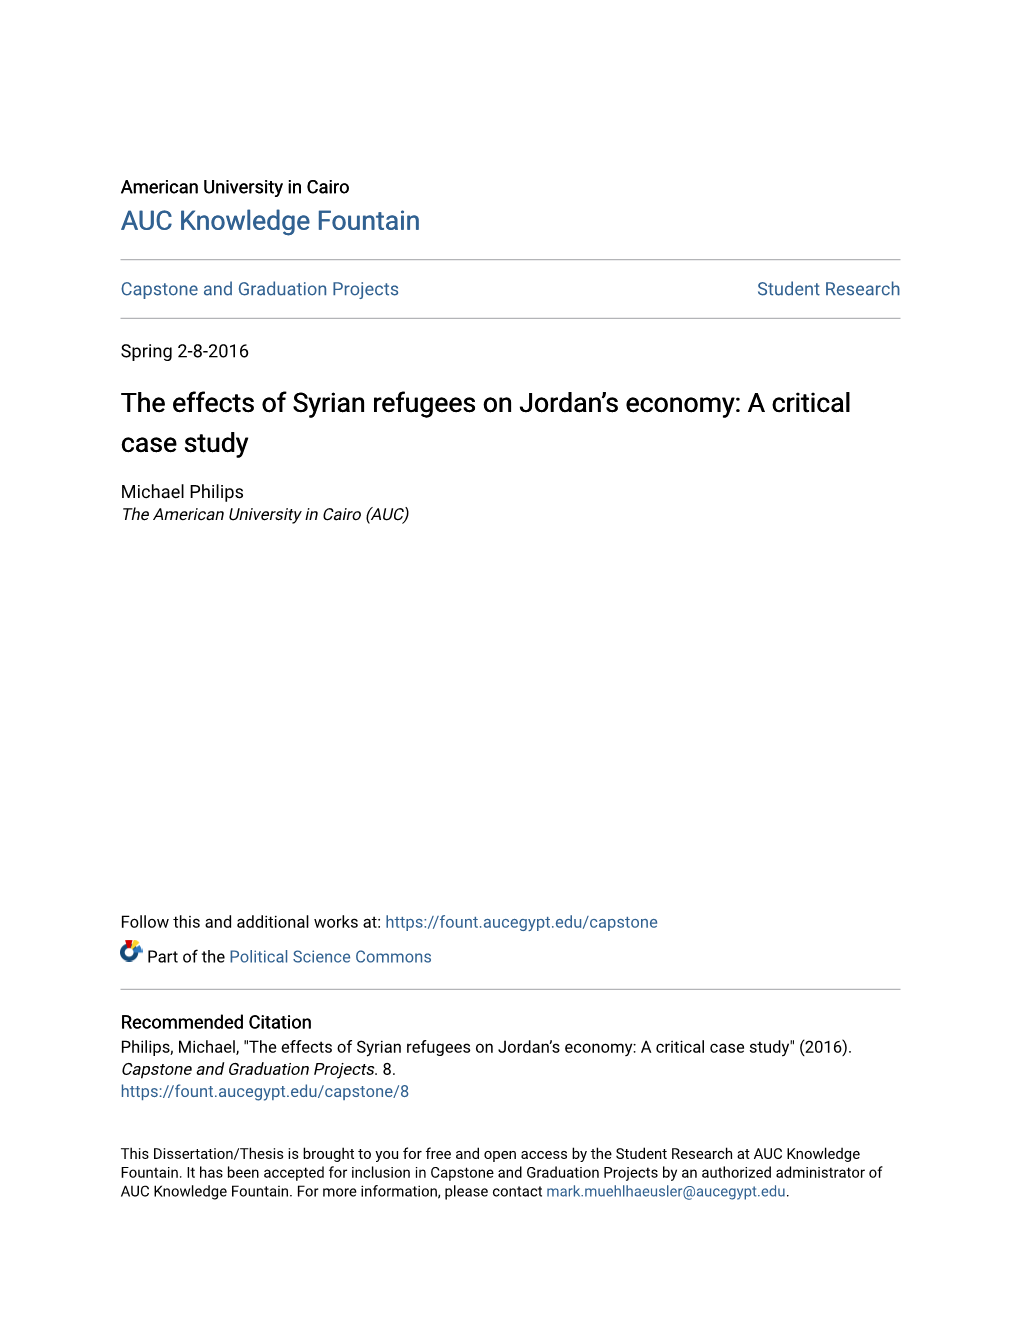 The Effects of Syrian Refugees on Jordan's Economy: a Critical Case